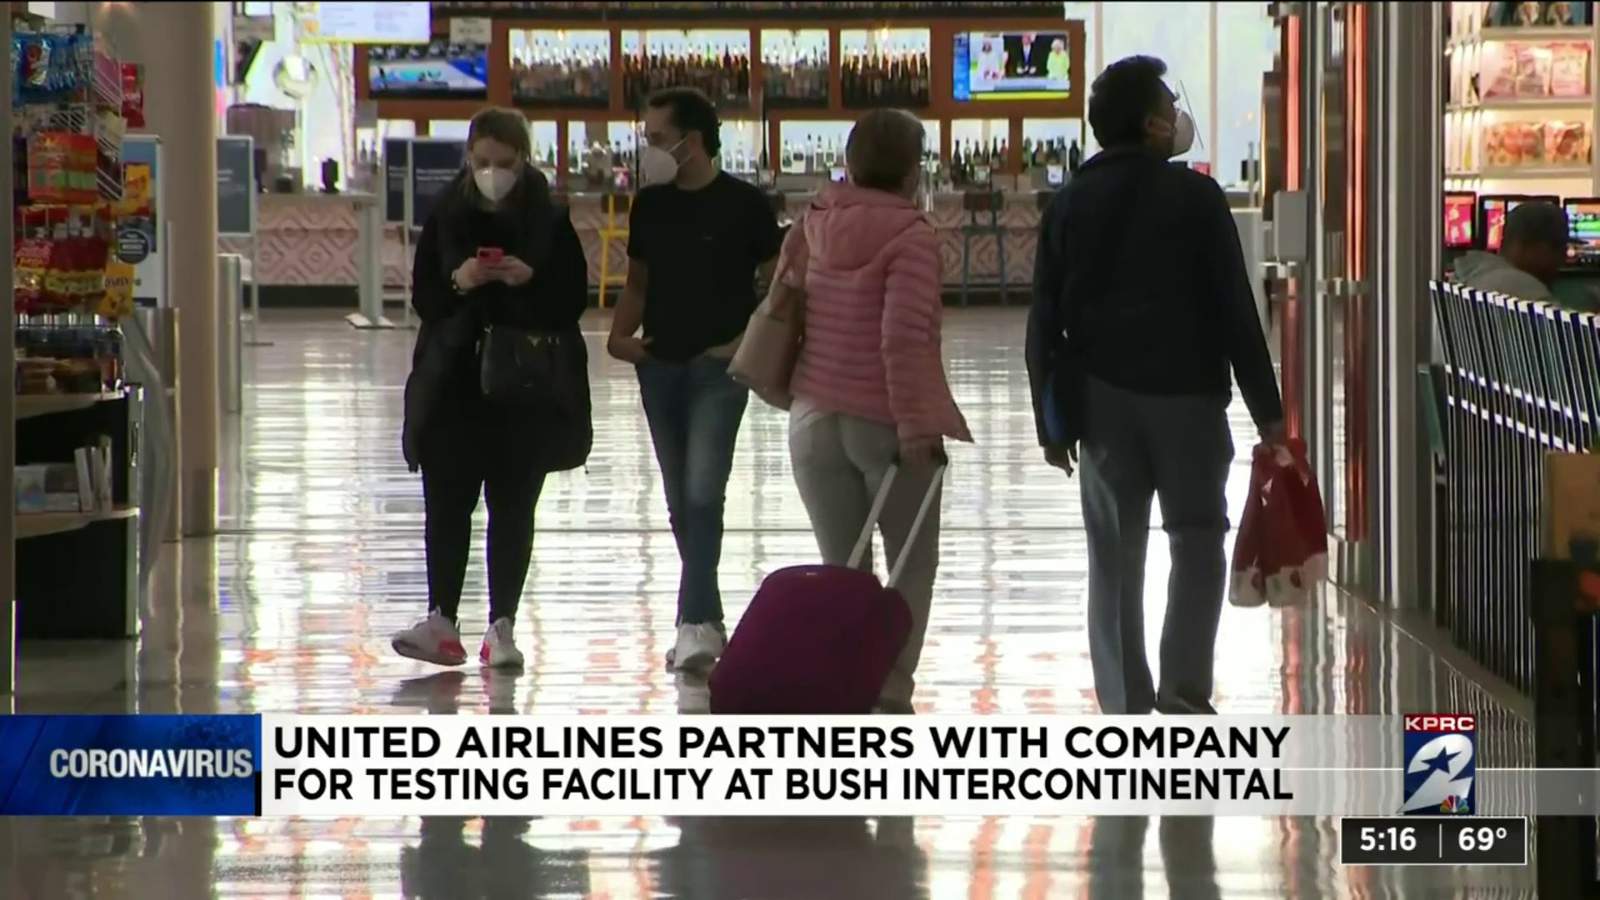 United offering COVID-19 testing for passengers at Bush Airport